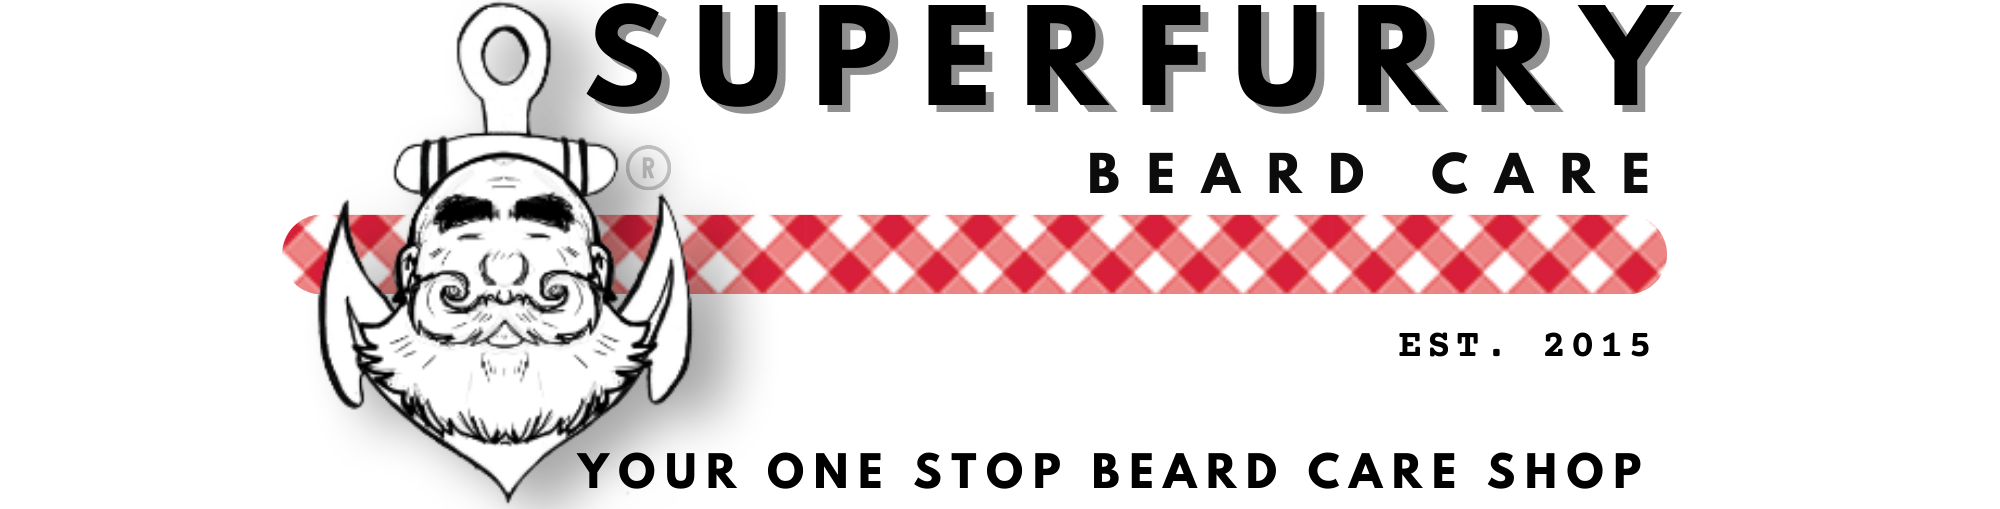 SUPERFURRY Your one stop Beard care Shop 